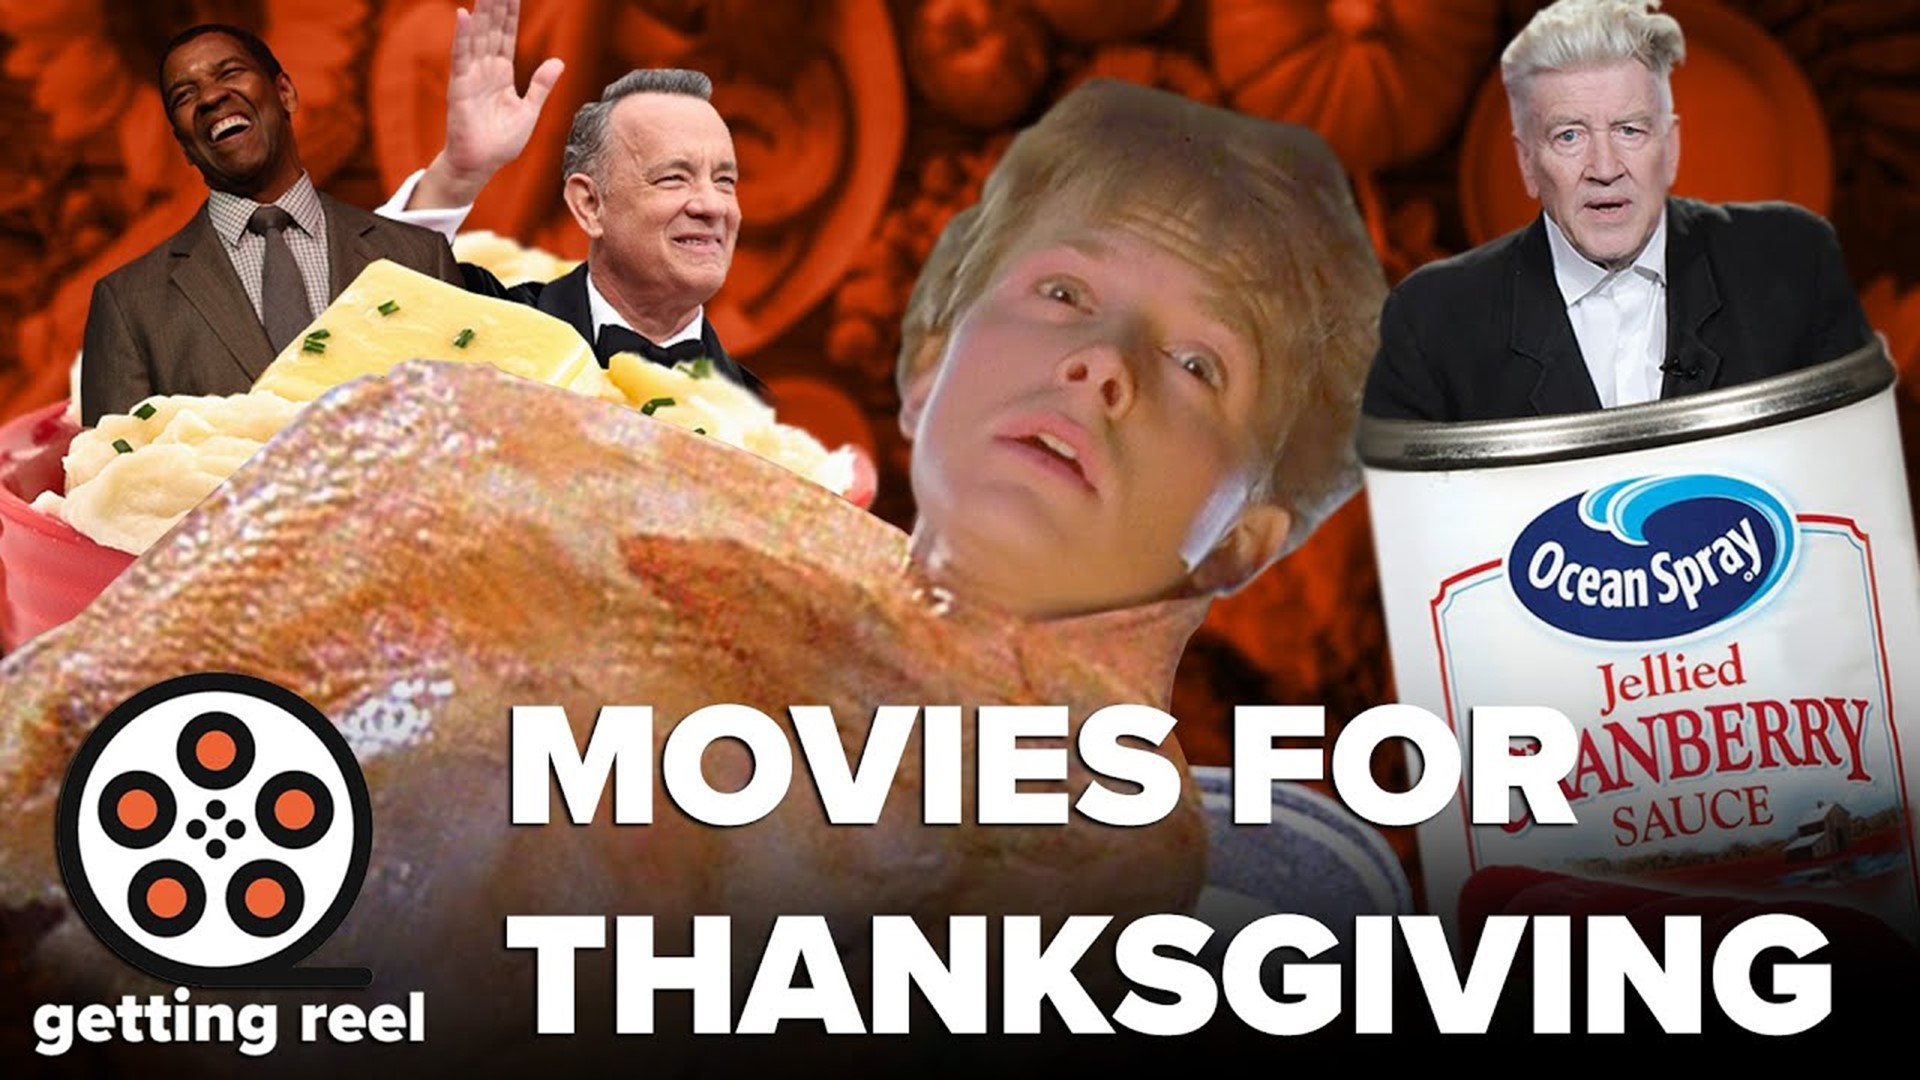 What better way to talk about movies than comparing them to Thanksgiving foods on Thanksgiving!